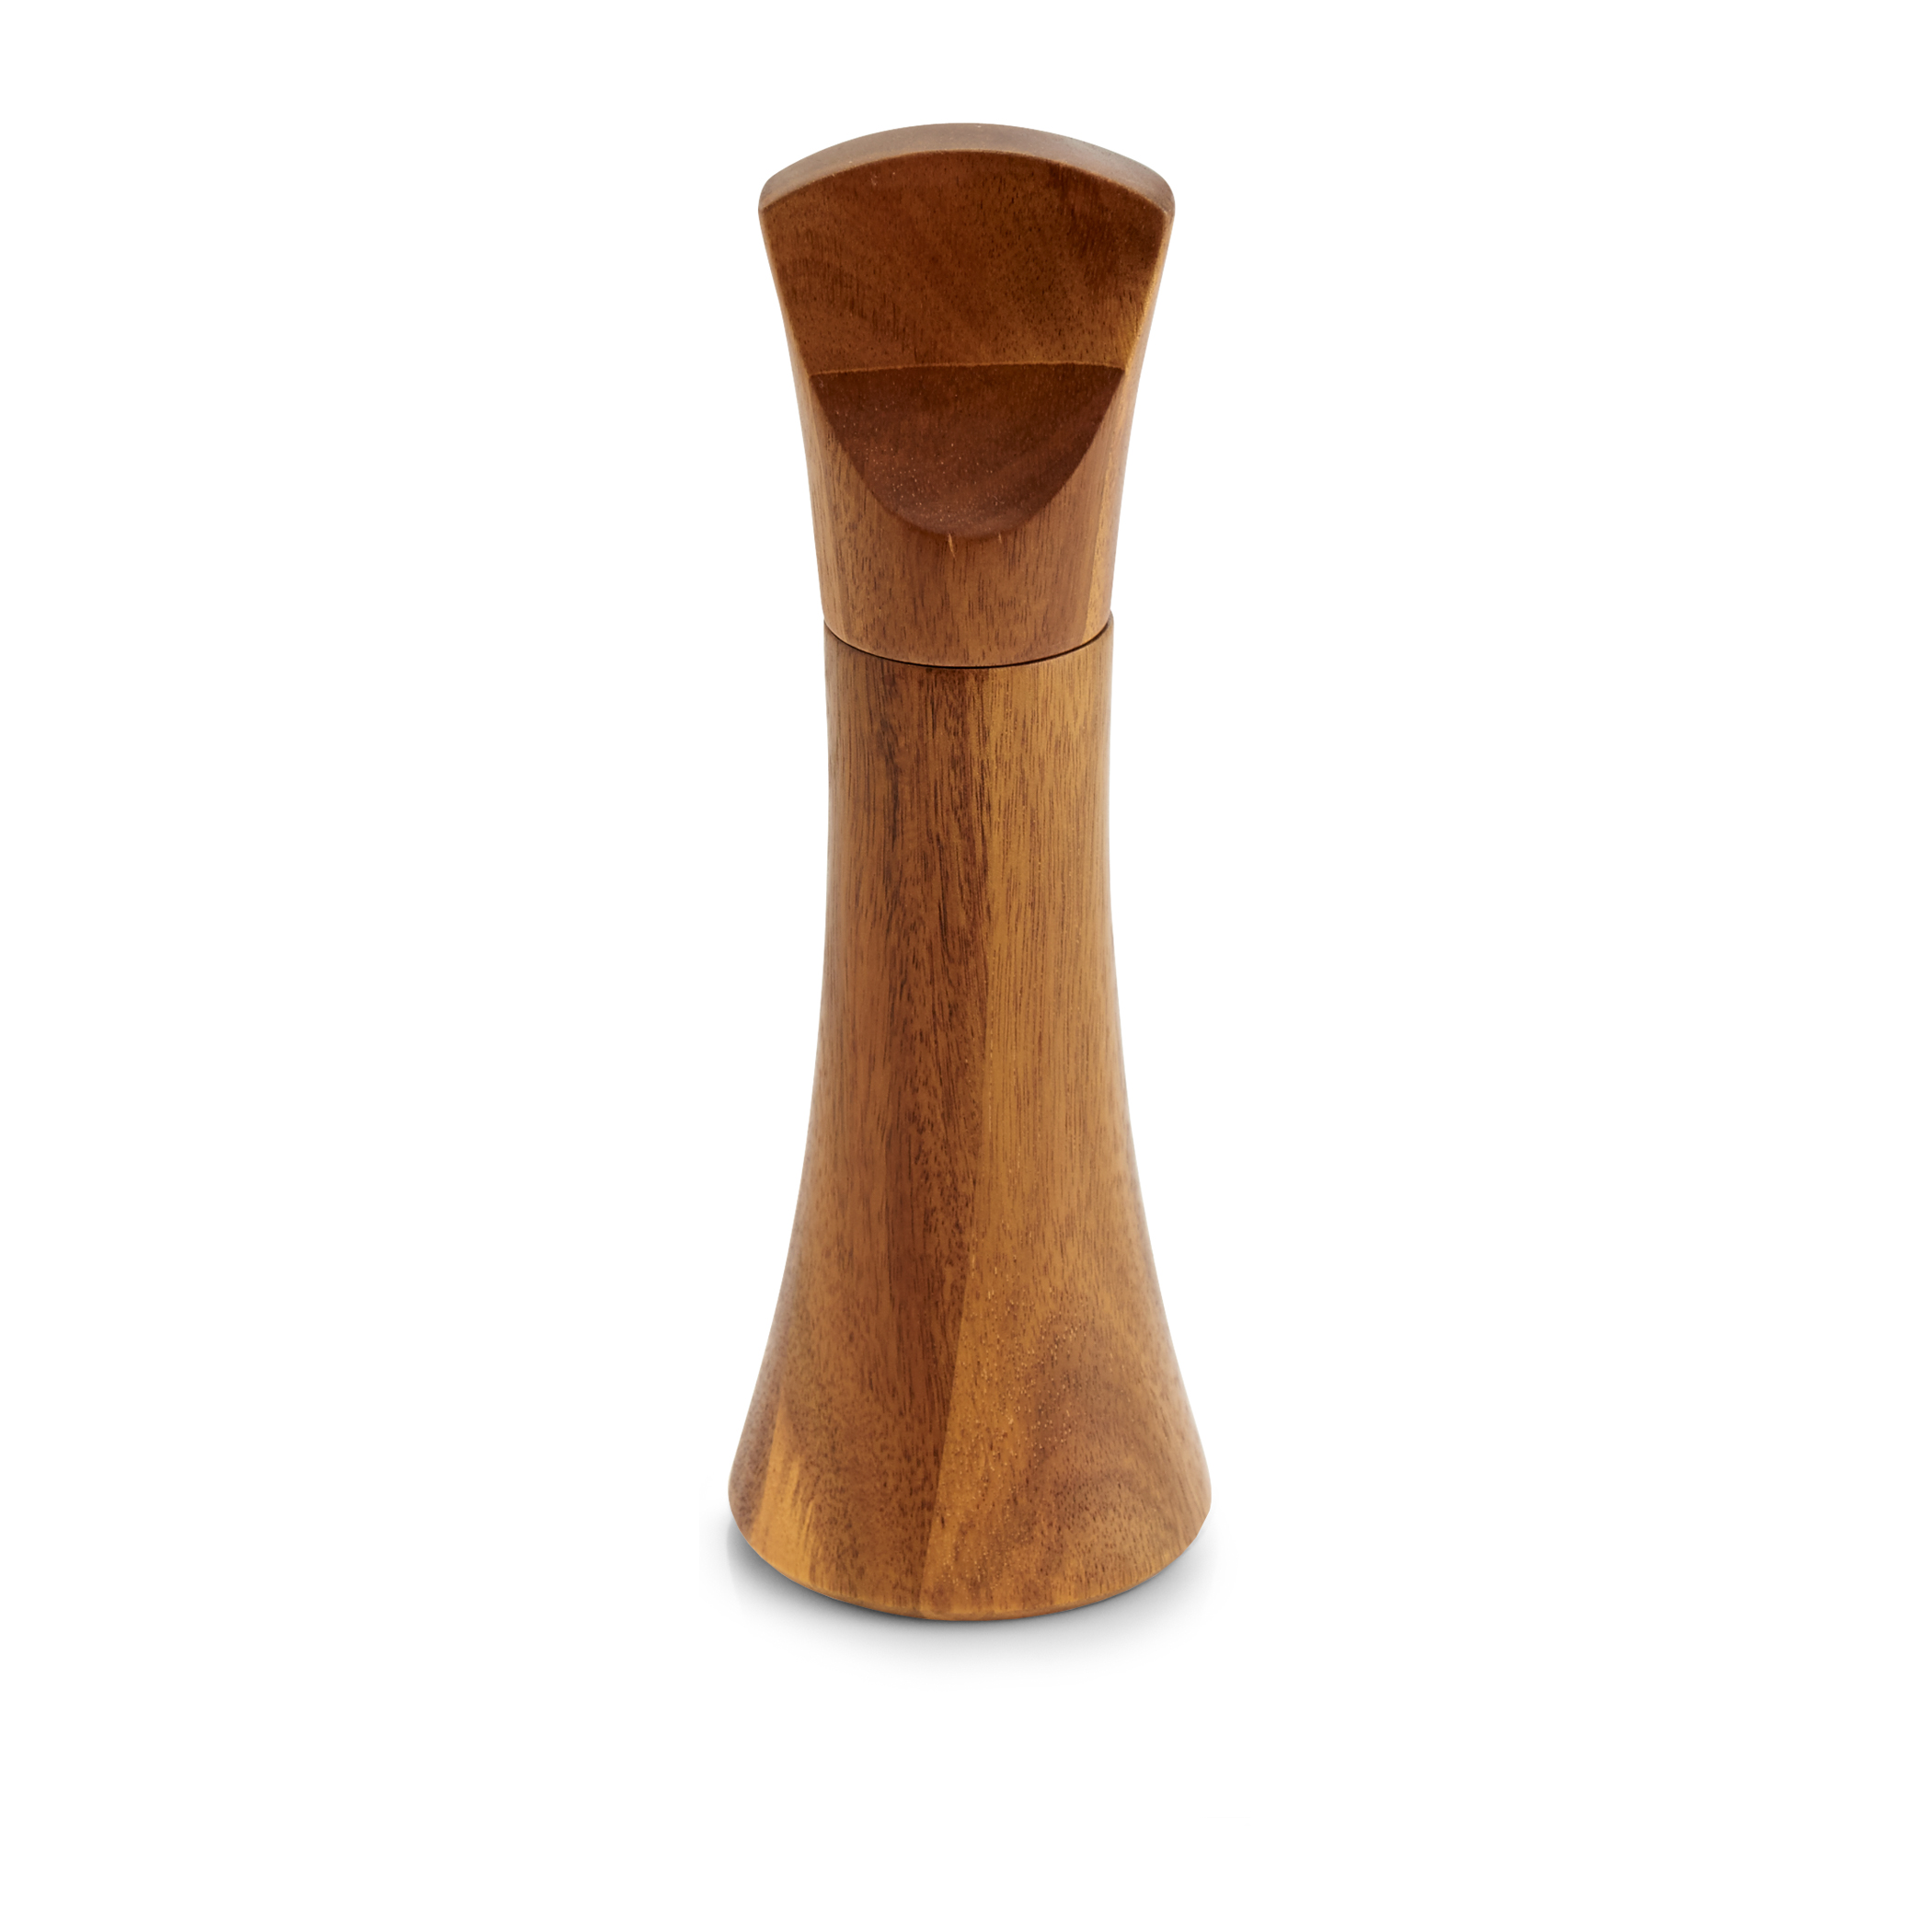 https://nambe.com/on/demandware.static/-/Sites-master/default/dw9a5fb443/products/large/MT1155_Contour_Pepper_Mill_Tall.jpg